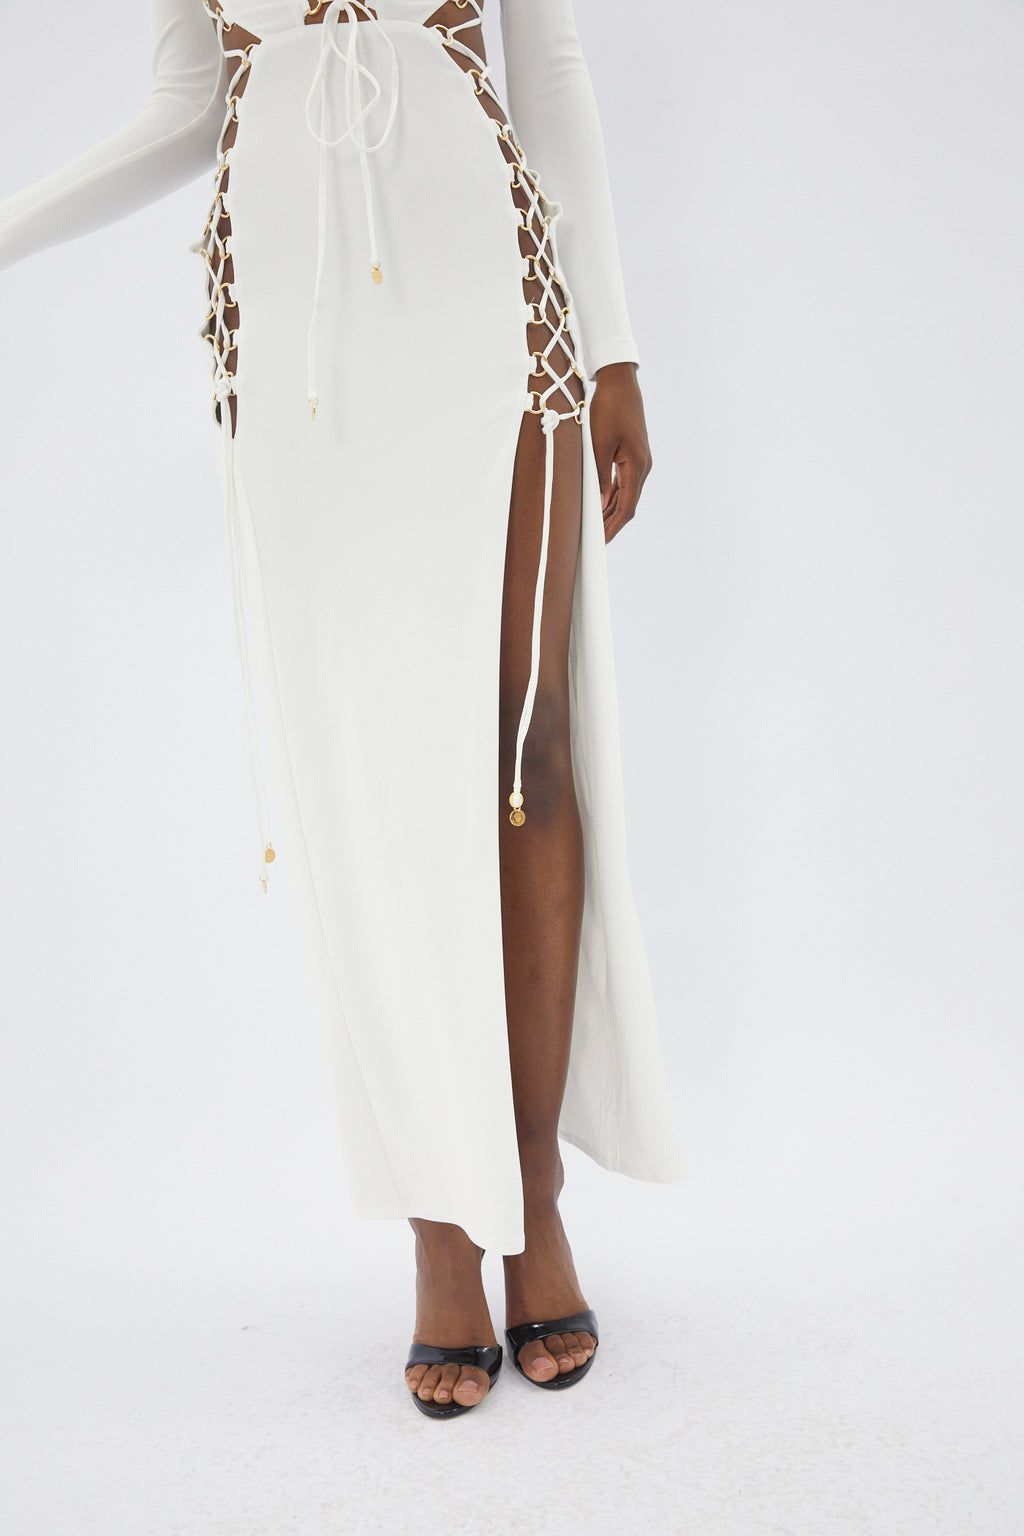 Electra White Gown